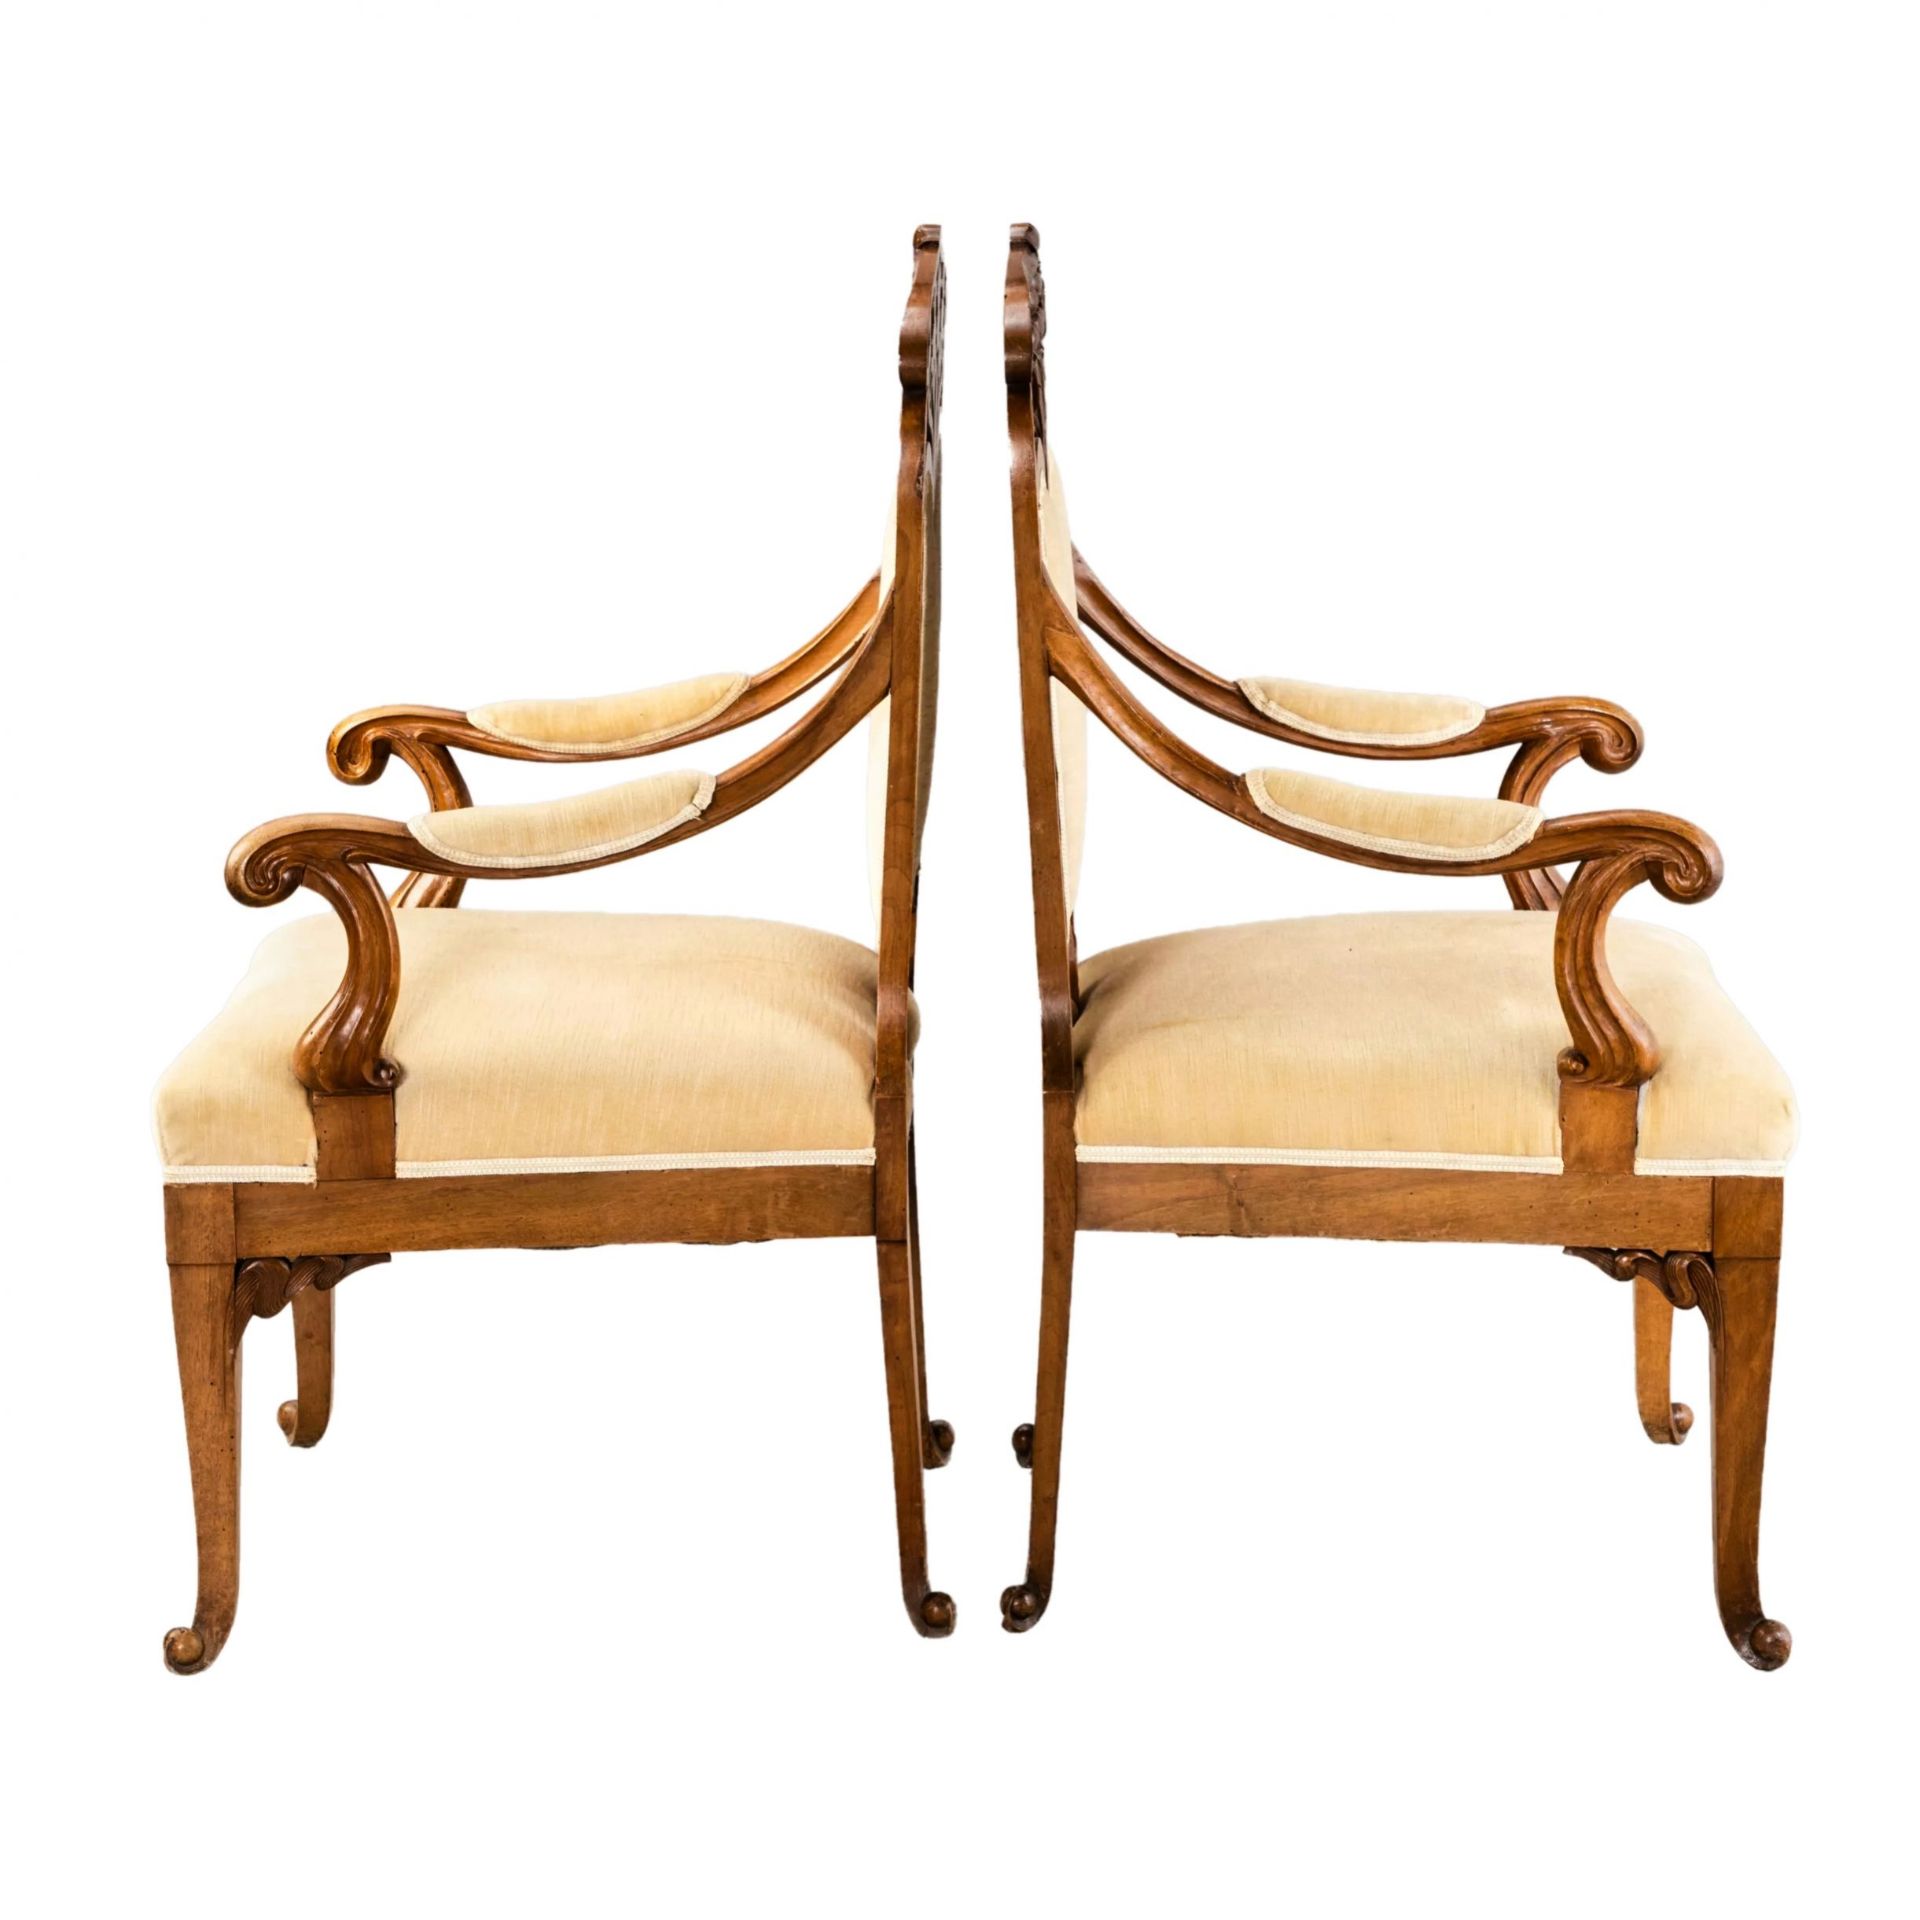 Furniture set in Art Nouveau style. France. 1905 - Image 7 of 13